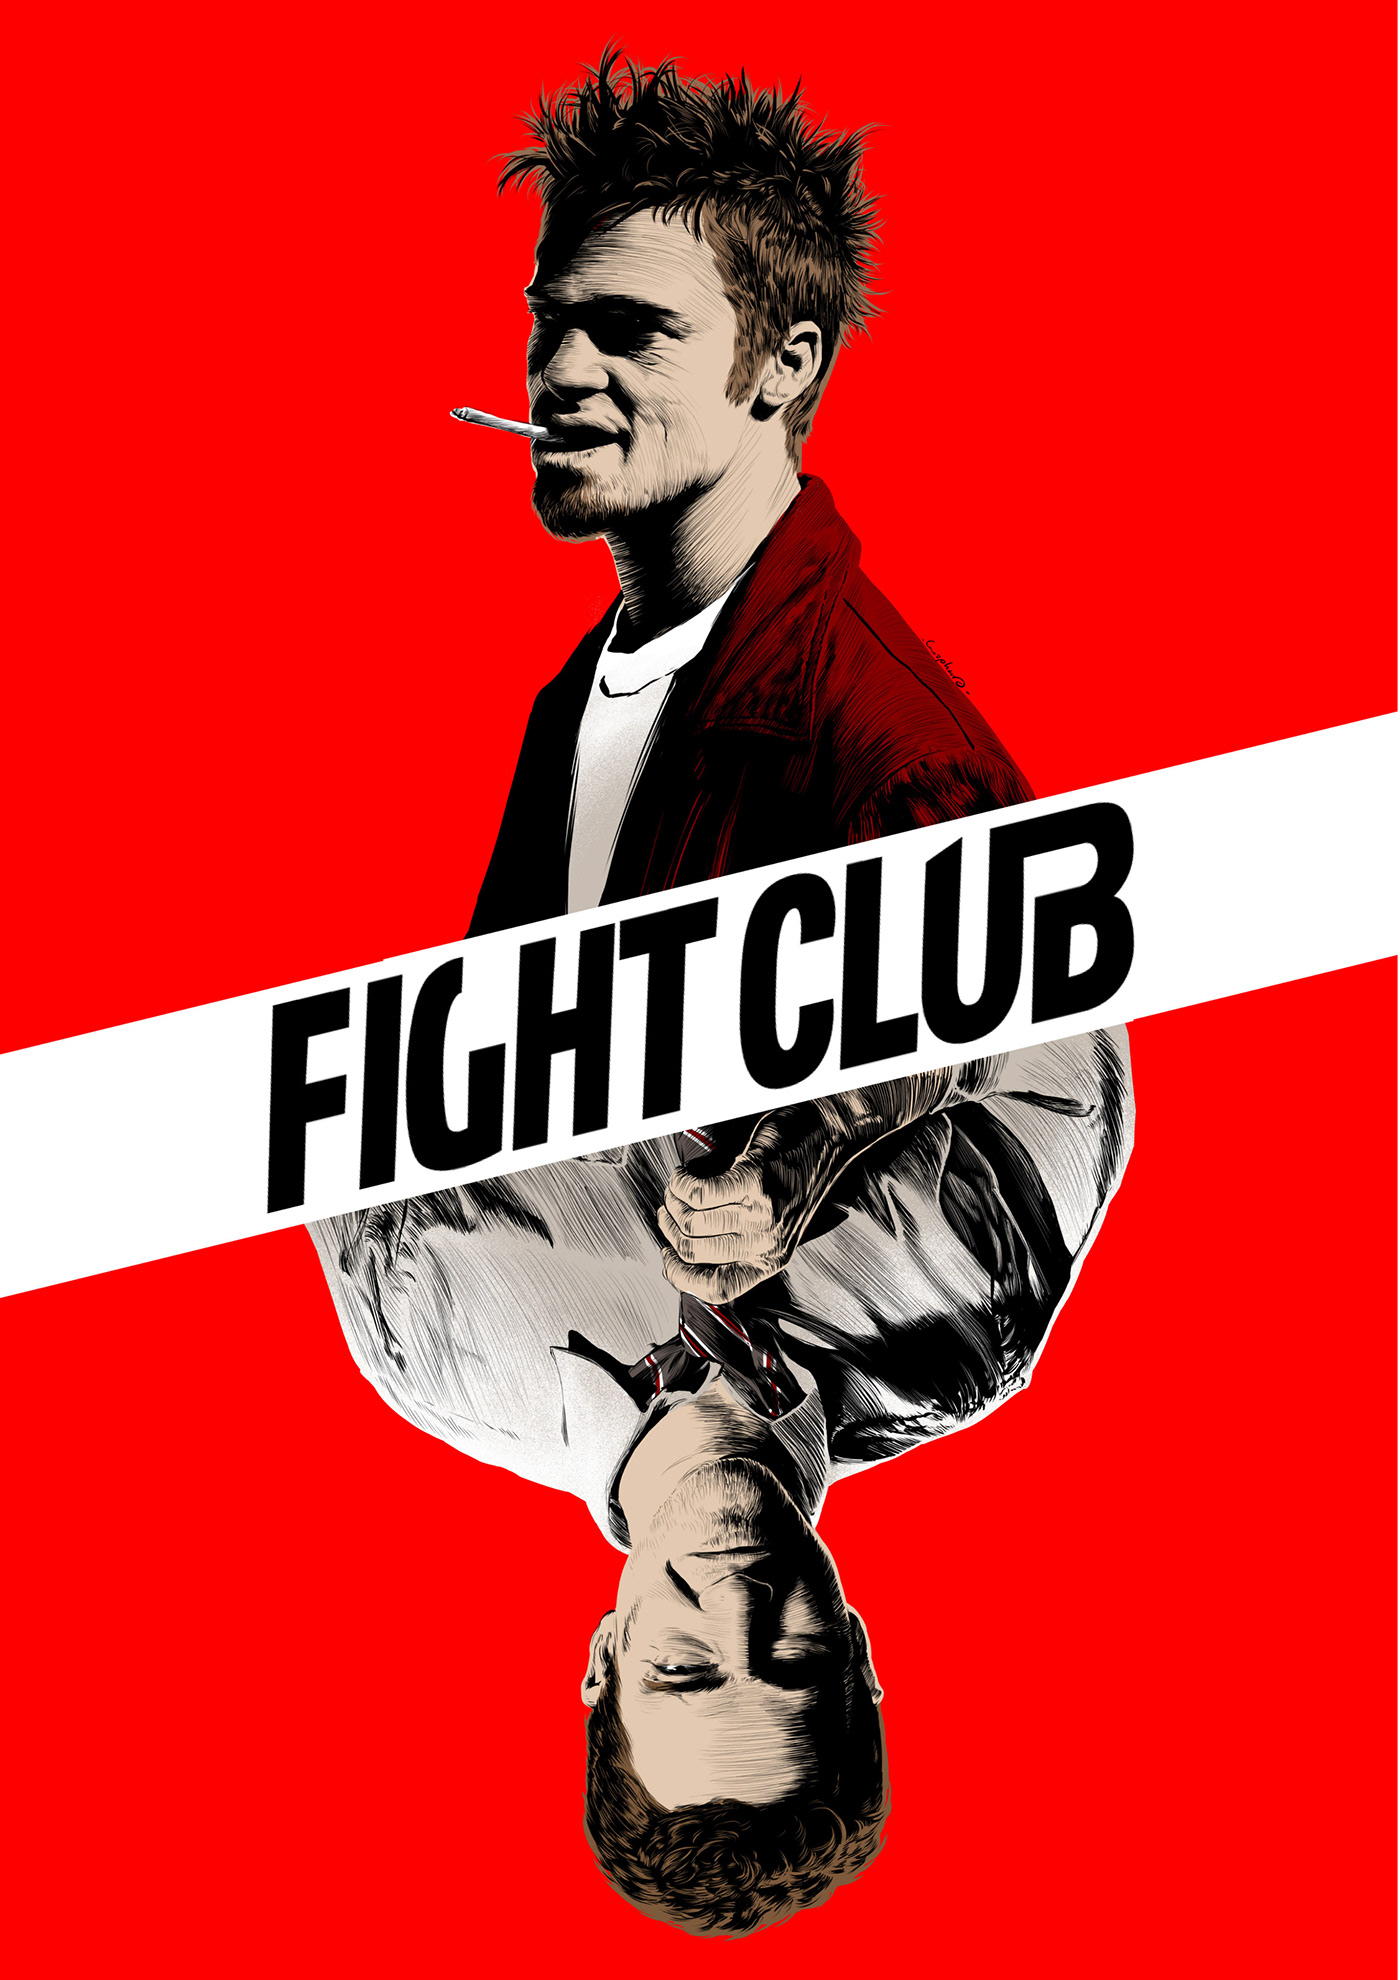 Fightclub comics red blackandwithe paolamorpheus blood Italy Style